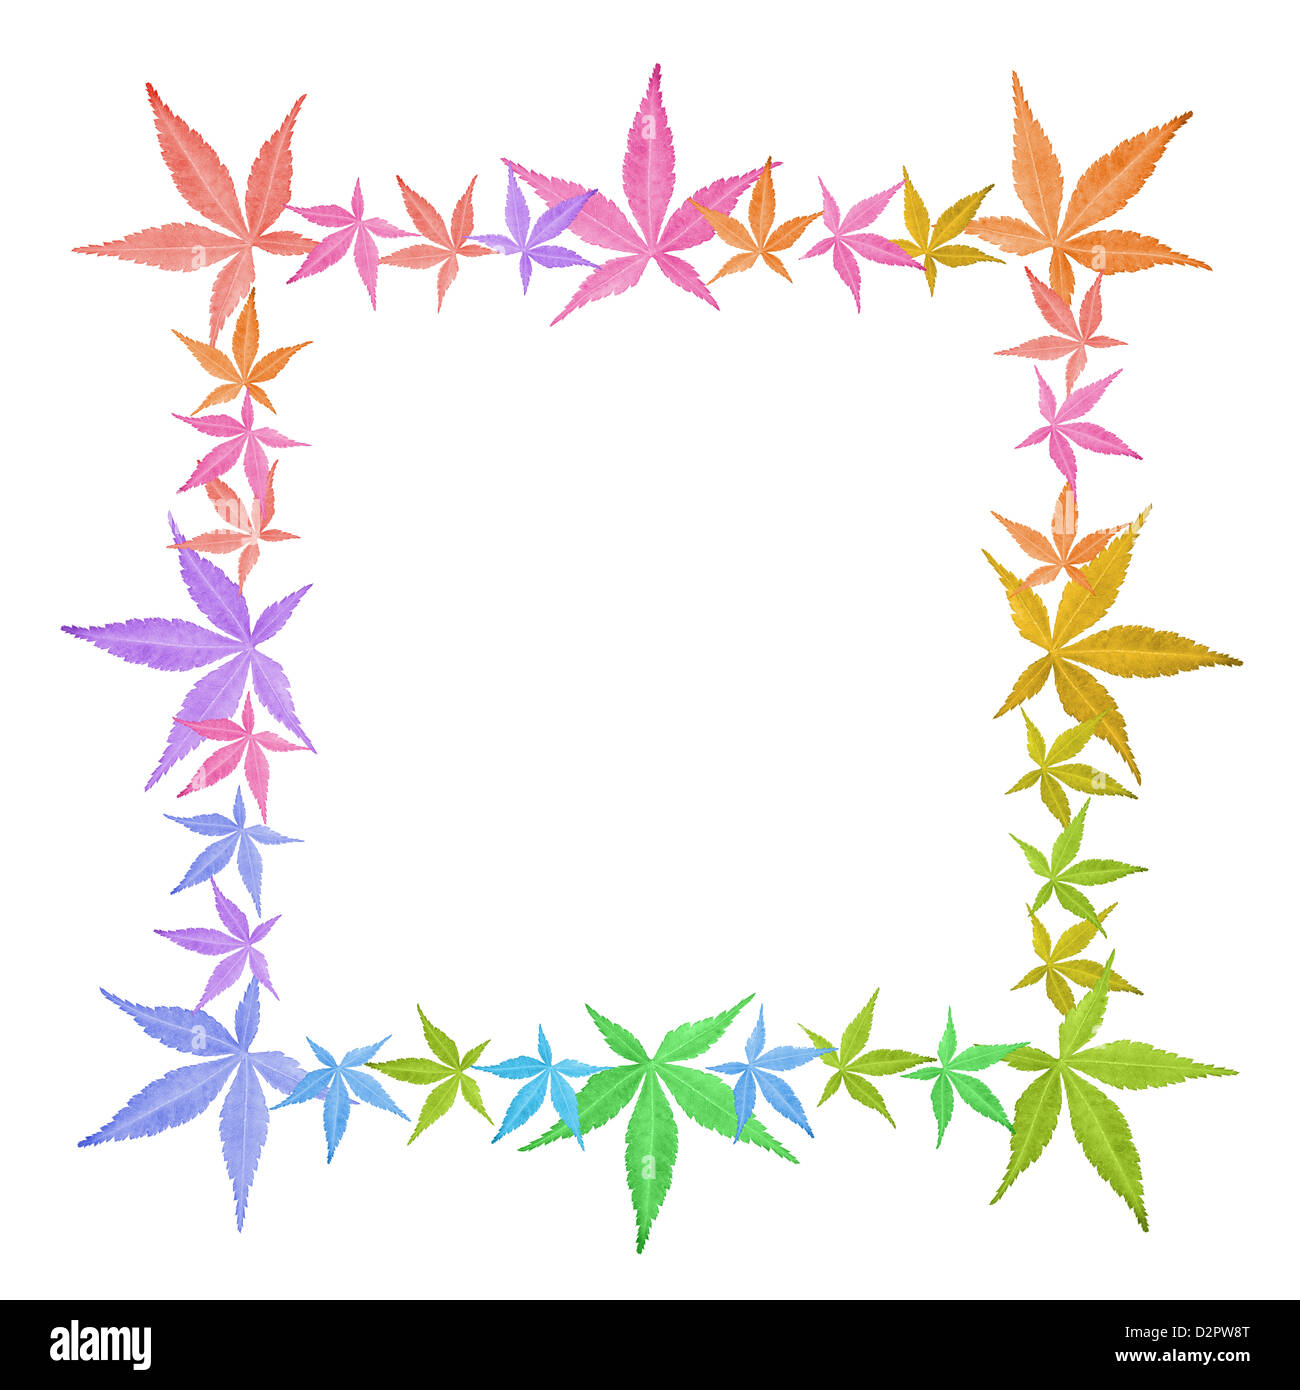 Square frame of colorful leaves isolated on white. Leaves in rainbow colors. Stock Photo